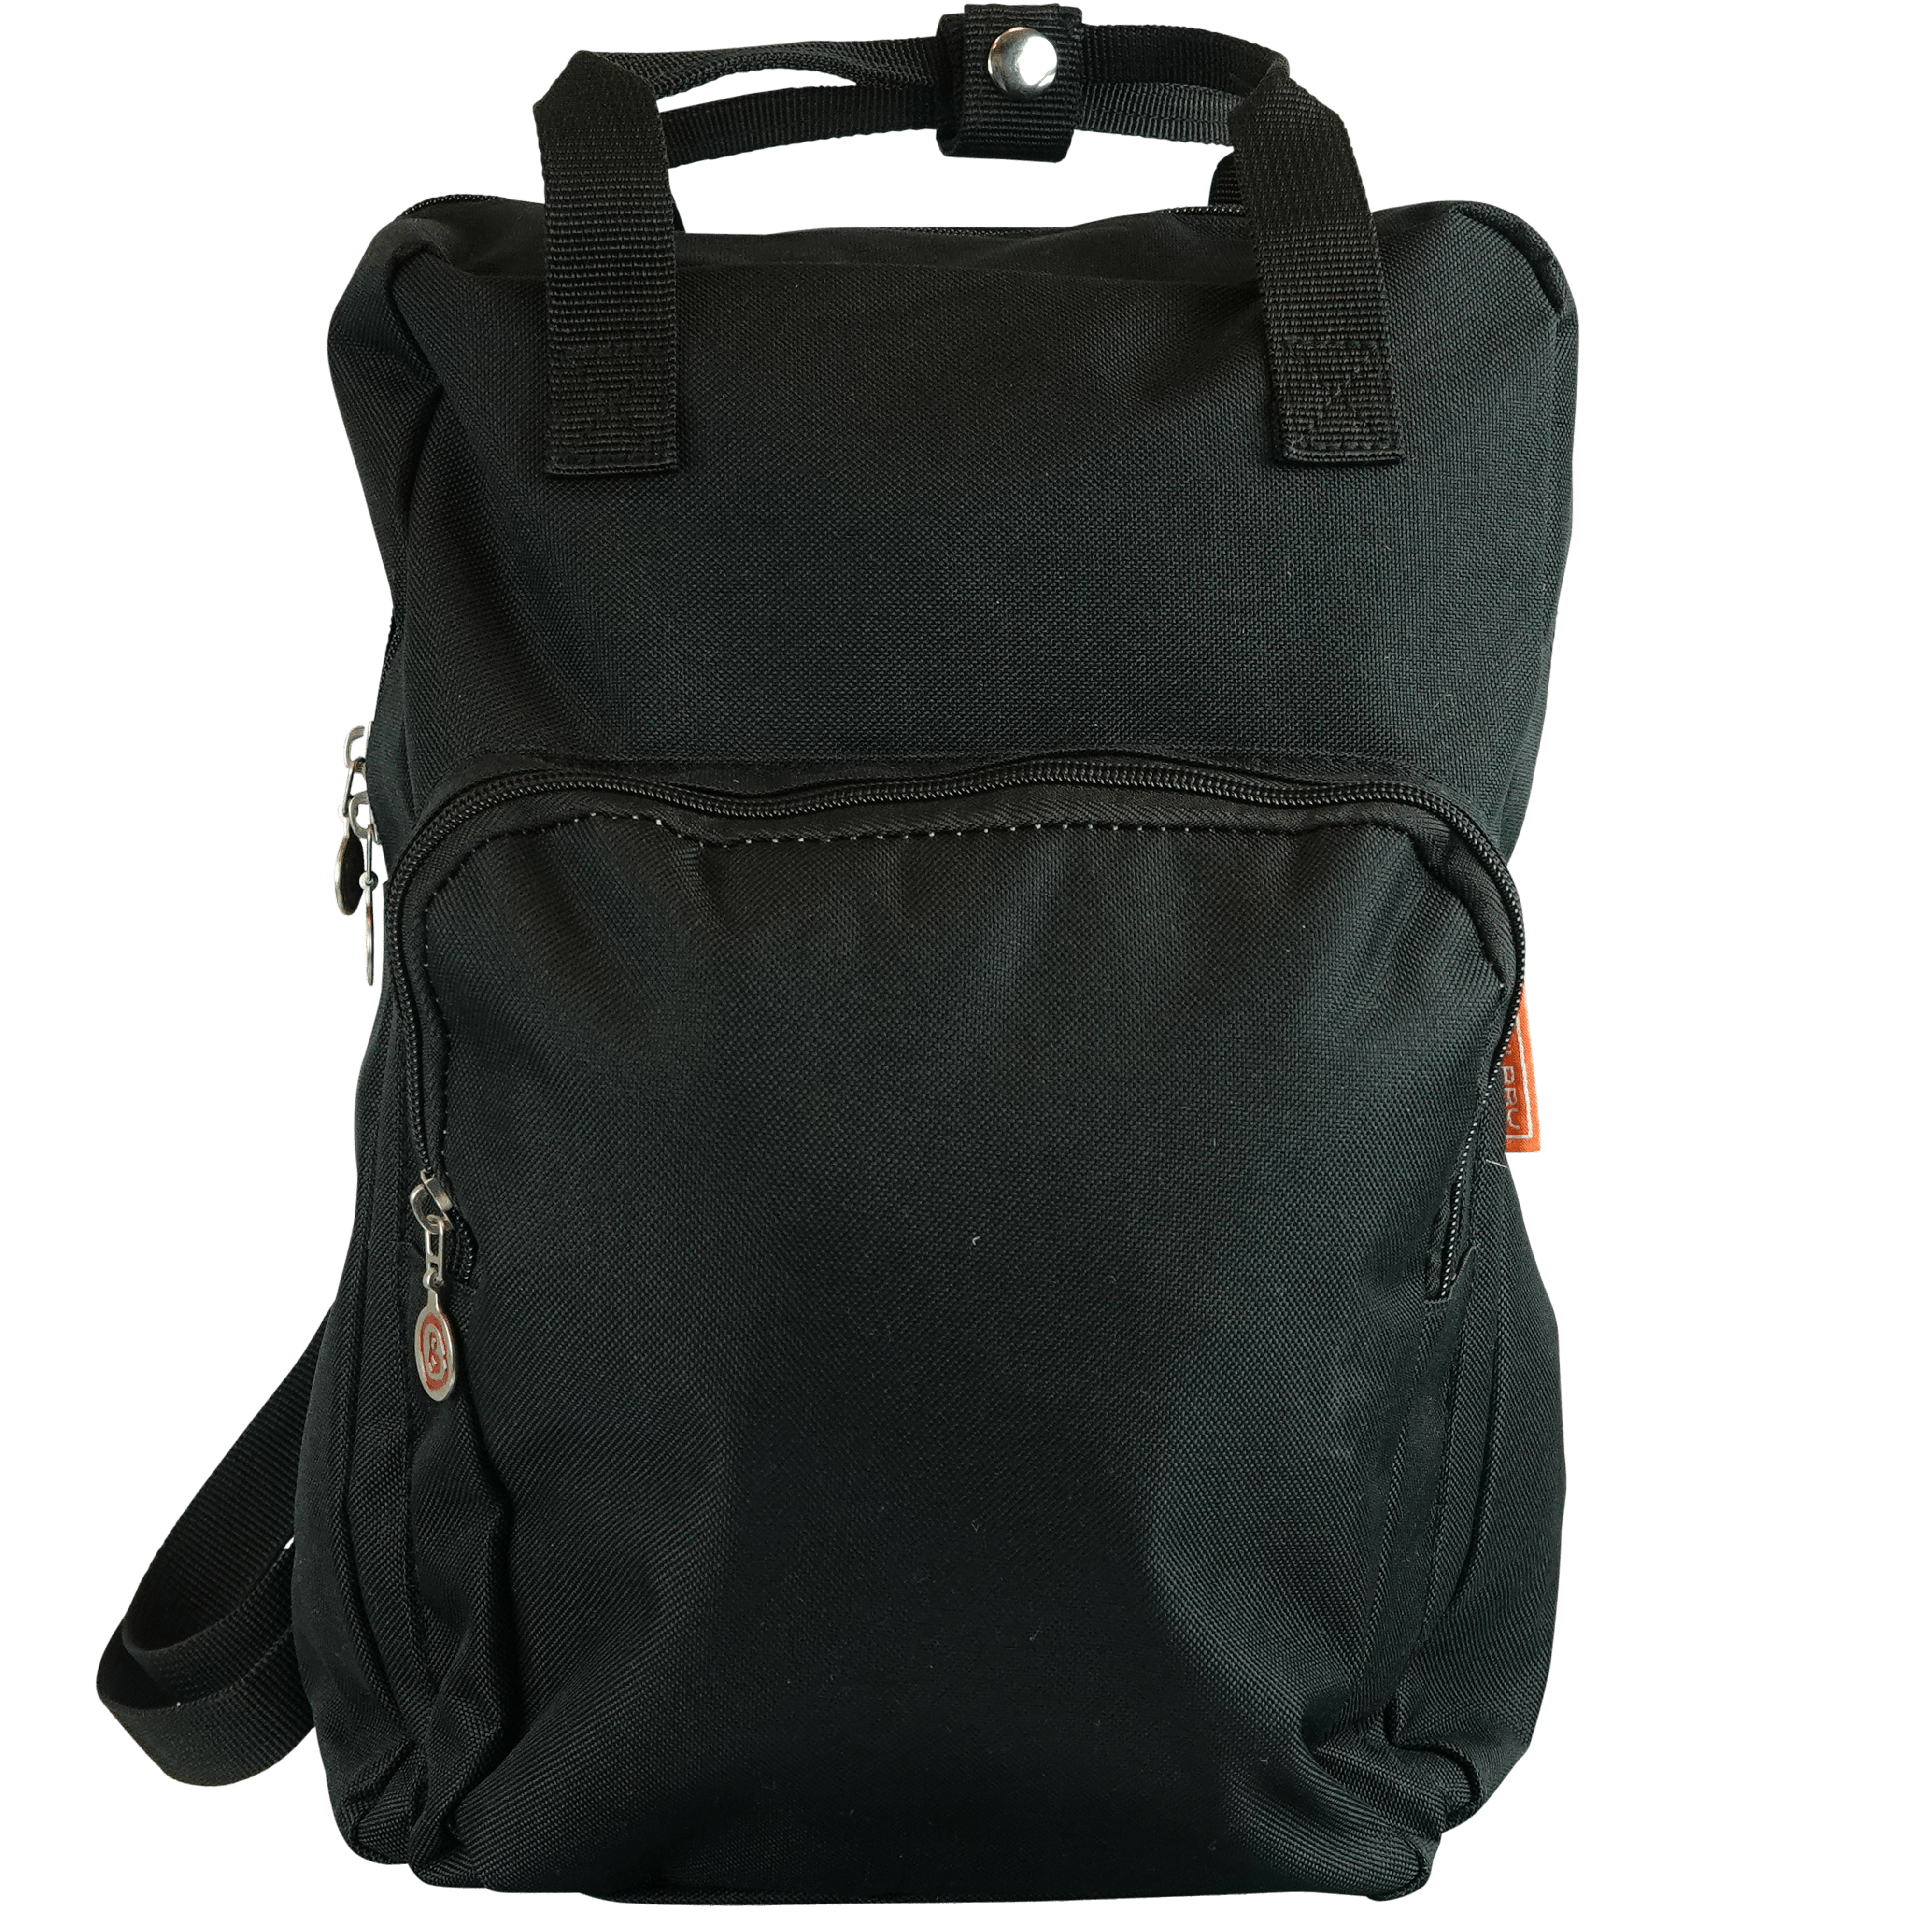 Backpack classic large black